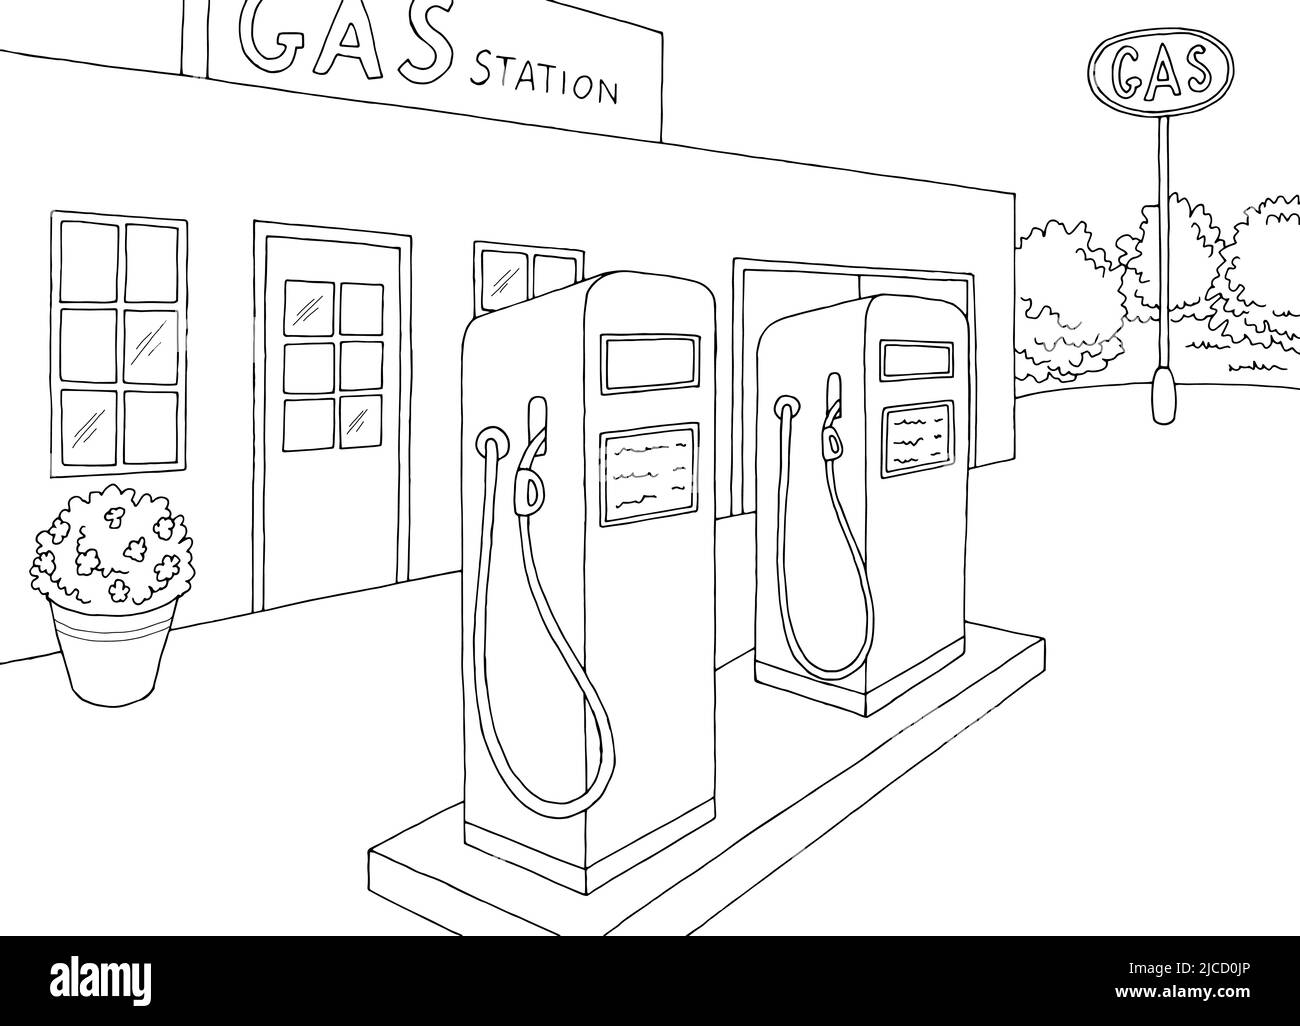 Old gas station exterior graphic black white sketch illustration vector Stock Vector